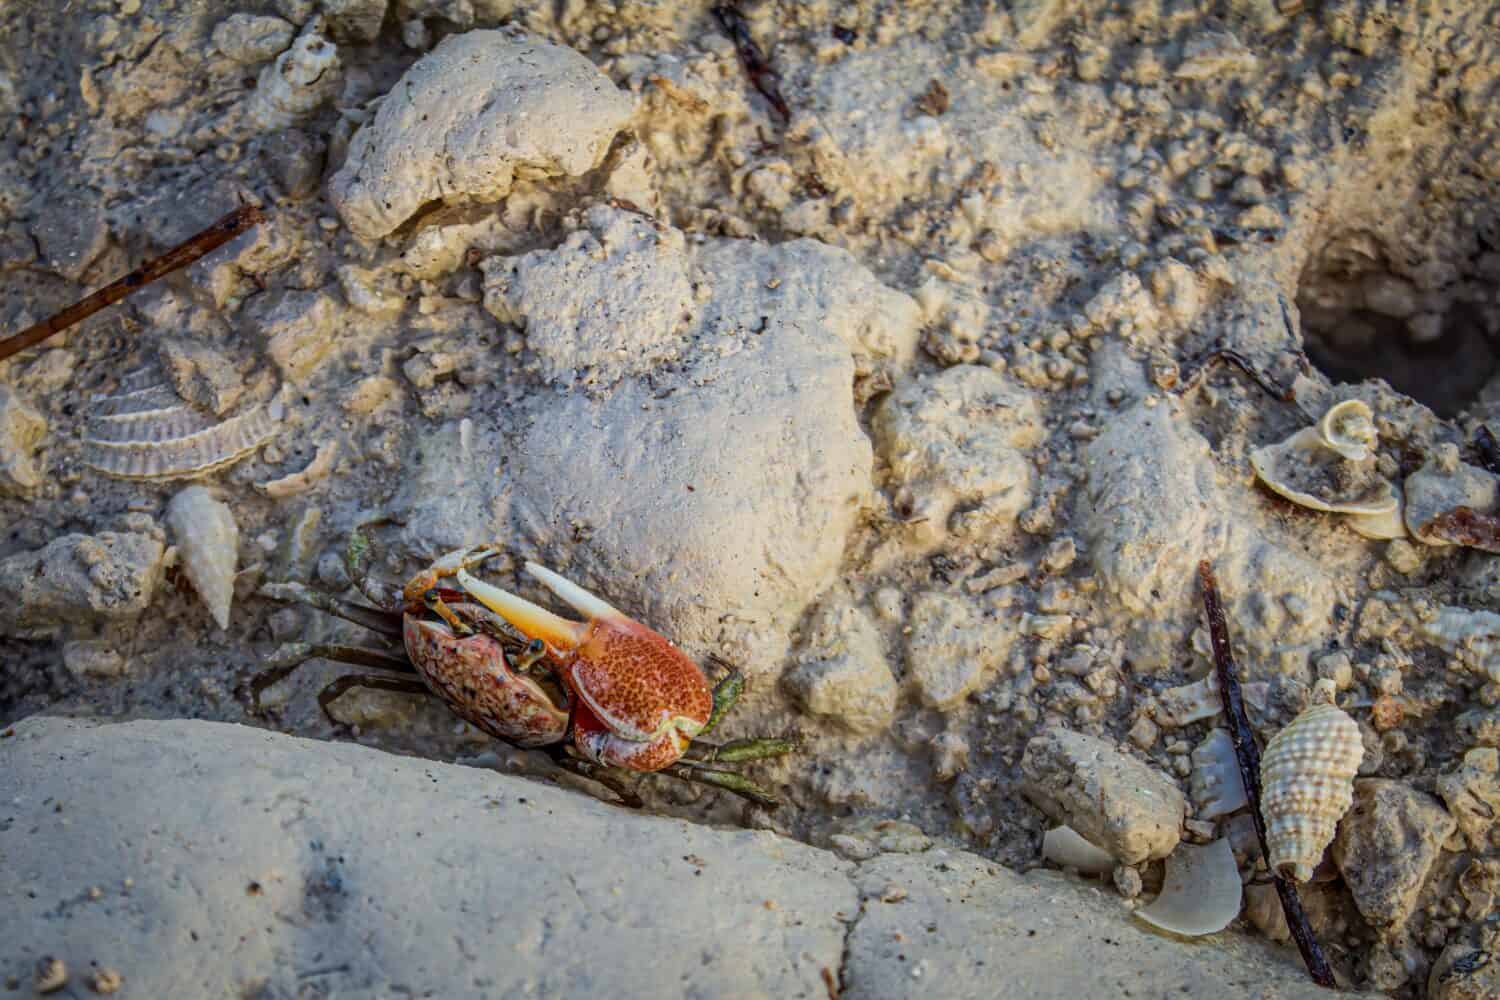 This fiddler crab went on the defensive when i got too close to its home. It uses its large claw for defense and intimidation.